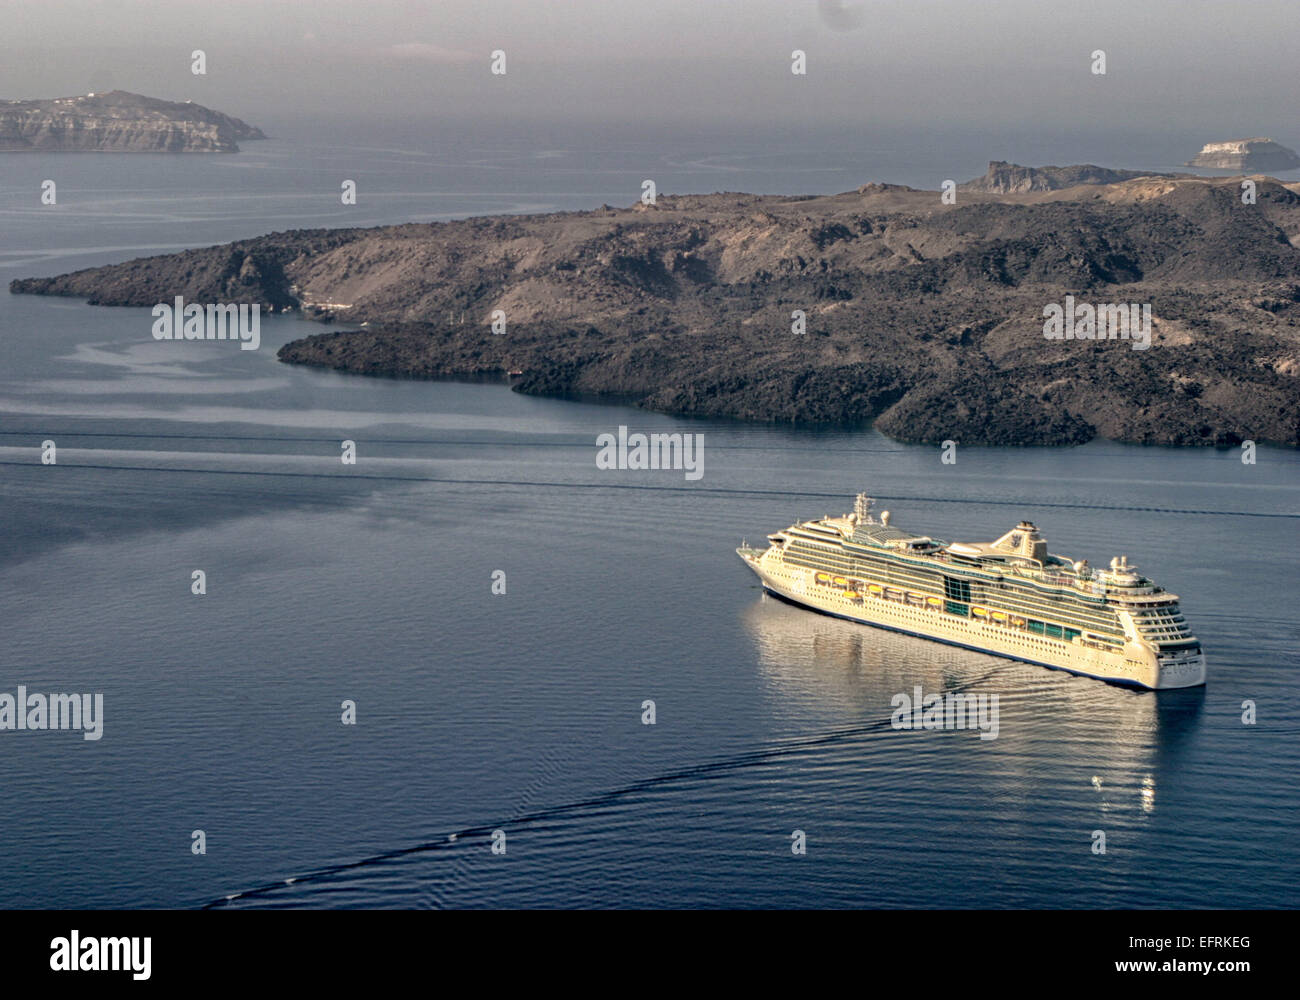 Santorini, Greece. 29th Sep, 2004. The Royal Caribbean International cruise ship Brilliance of the Seas sails past the volcanic island of Nea Kamini in the Santorini lagoon caldera (volcanic crater). The southernmost member of the Cyclades island group, colorful Santorini is a favorite tourist and cruise ship destination. © Arnold Drapkin/ZUMA Wire/Alamy Live News Stock Photo